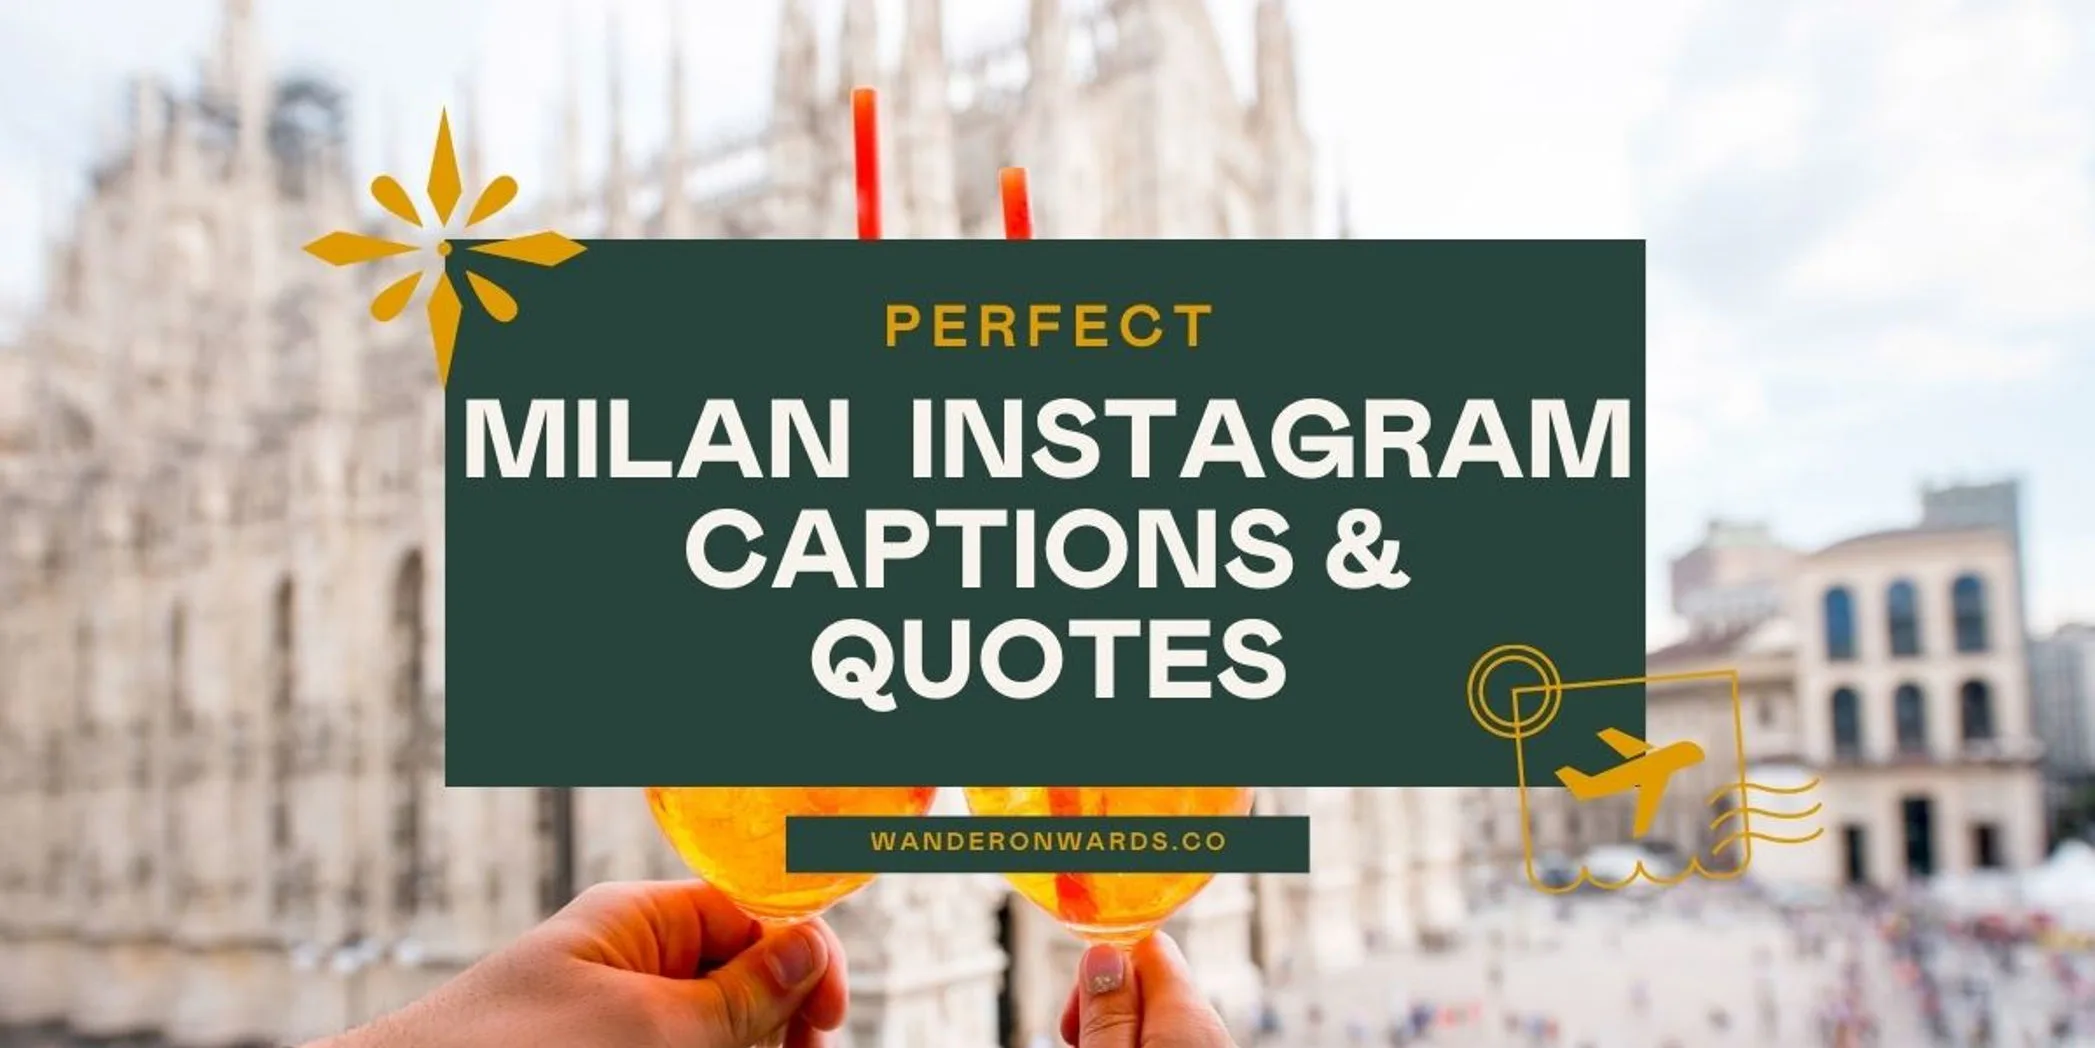 text says 'perfect milan instagram captions & quotes